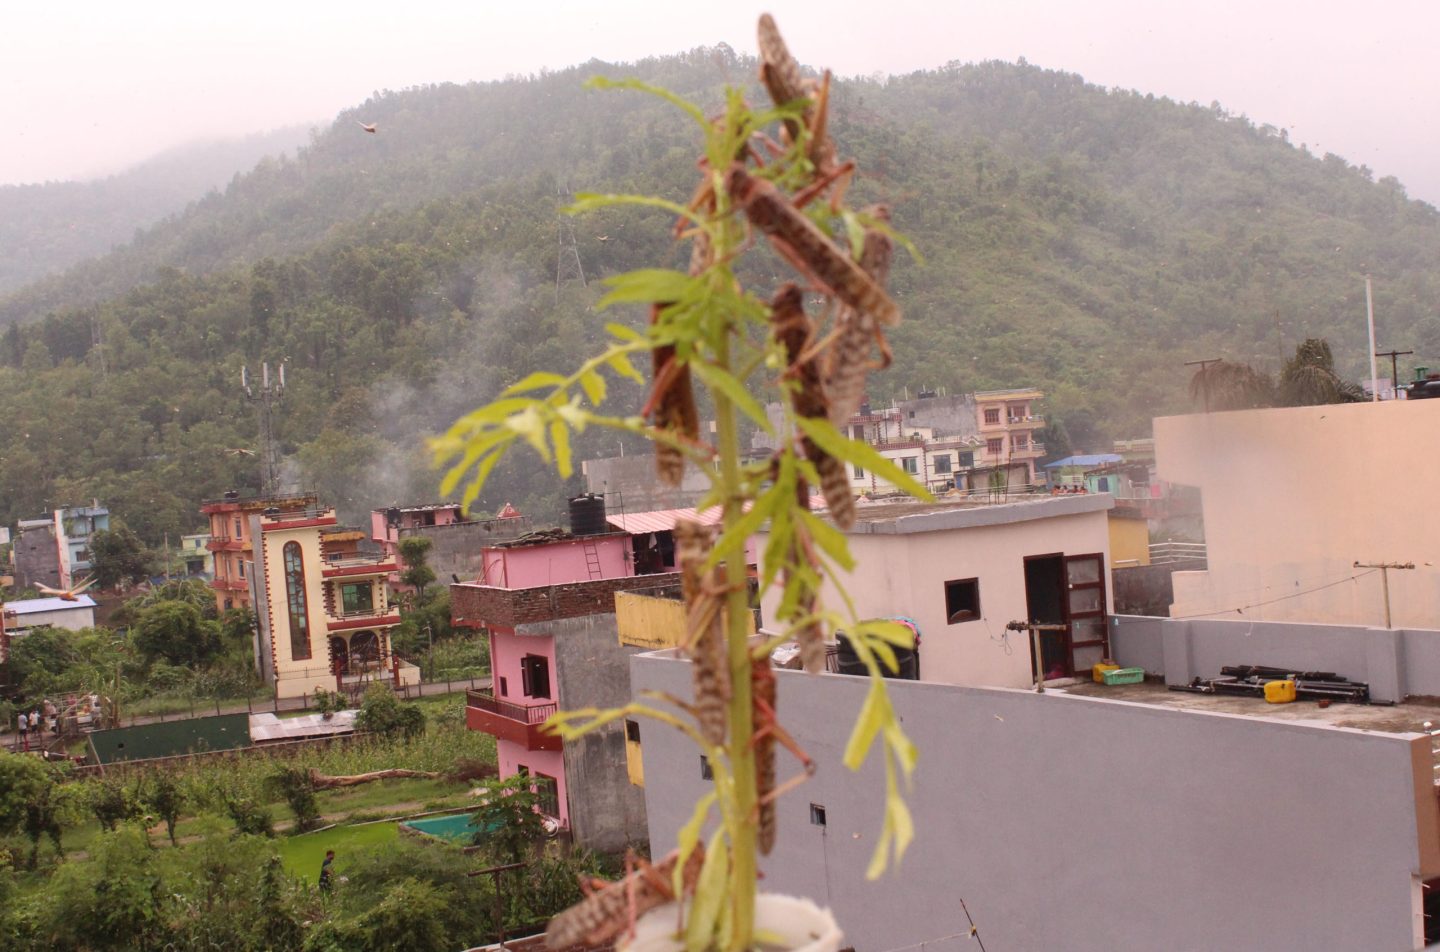 Locusts spread to 27 districts of Nepal